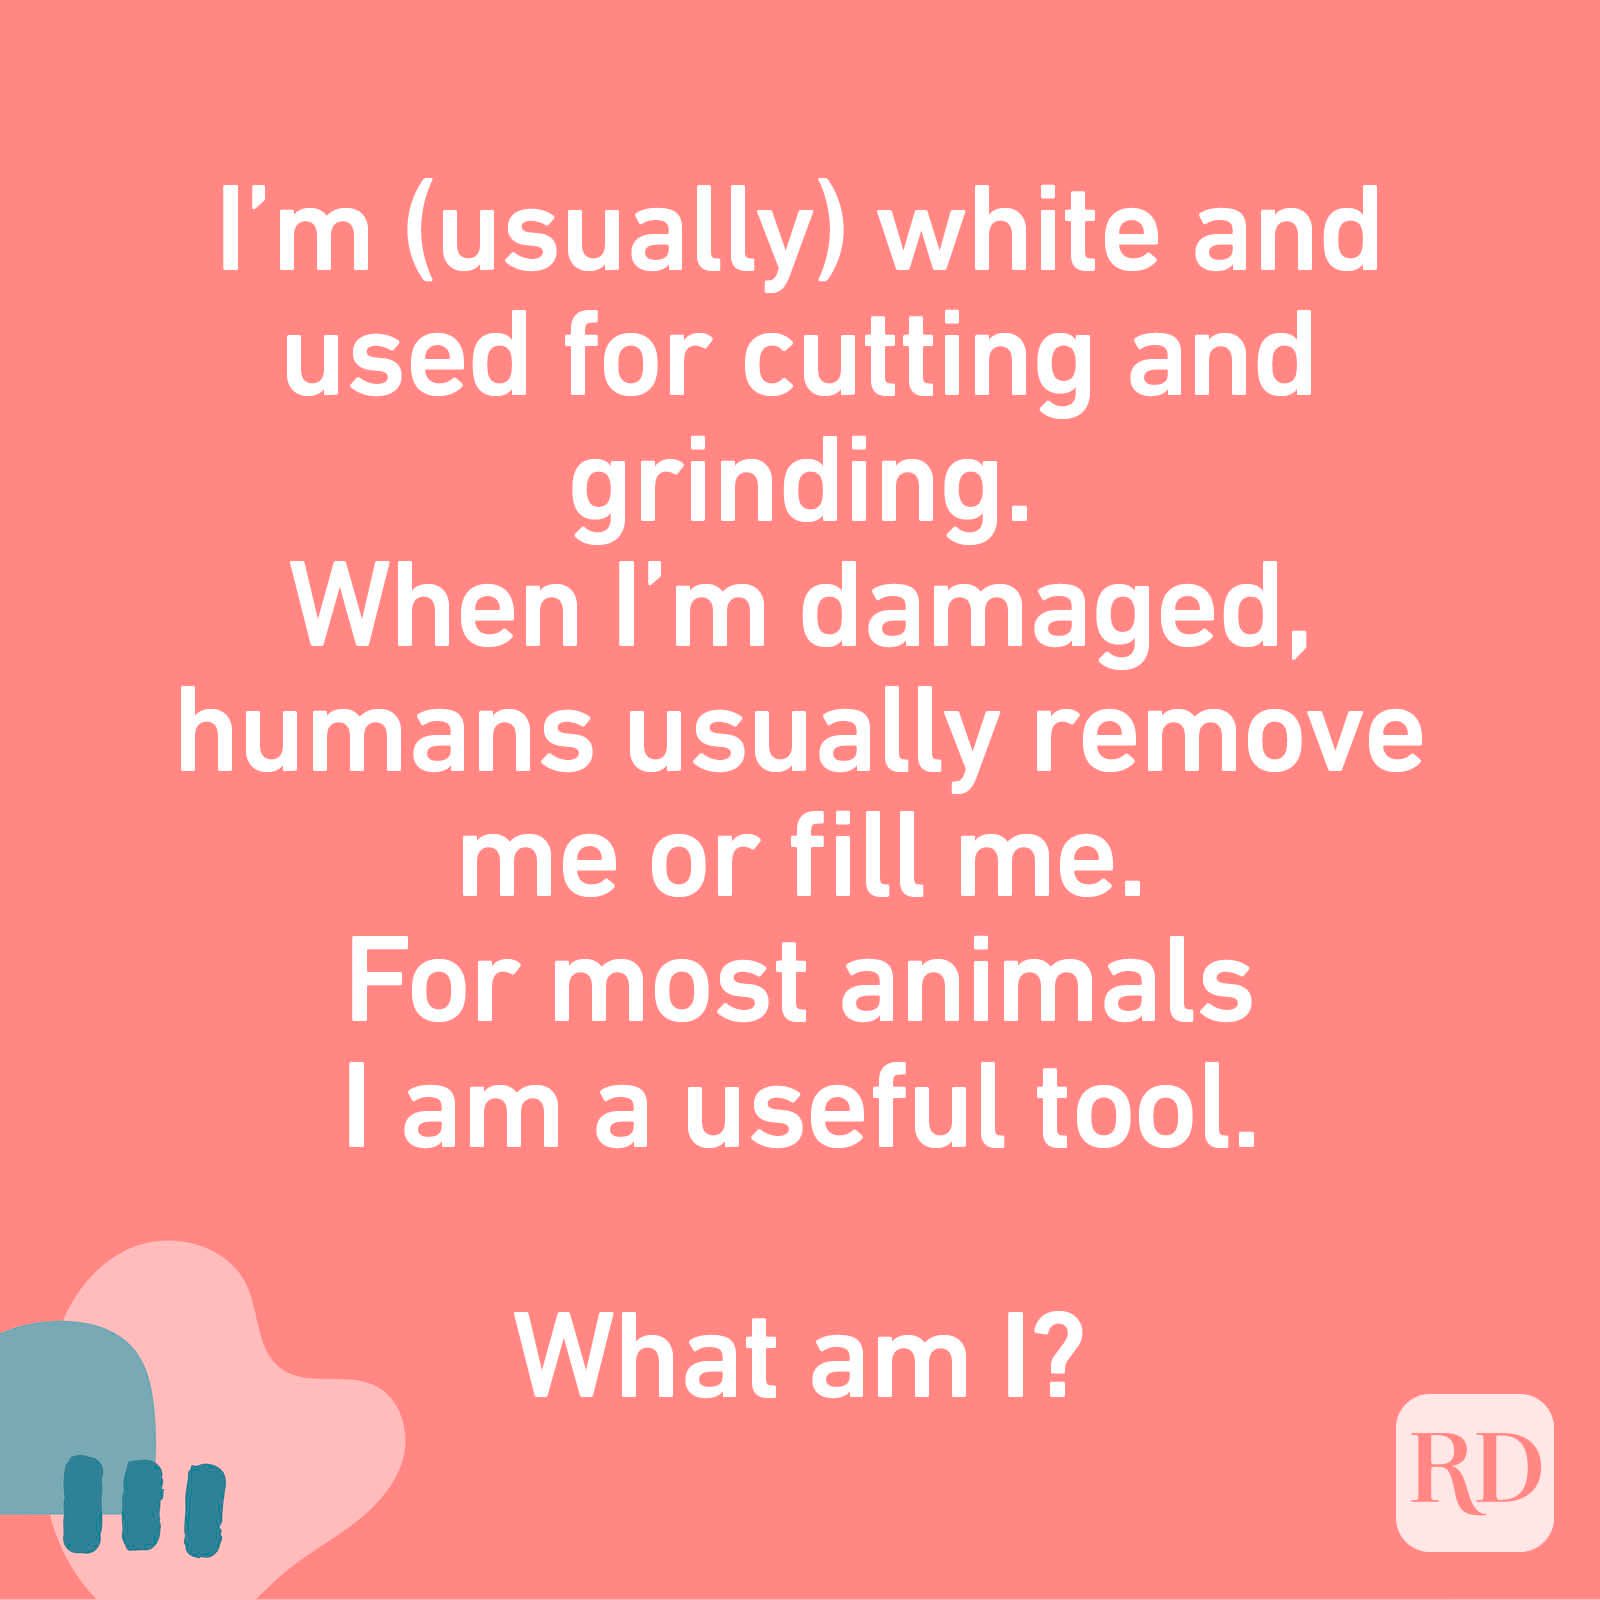 I’m (usually) white and used for cutting and grinding. When I’m damaged, humans usually remove me or fill me. For most animals I am a useful tool. What am I?